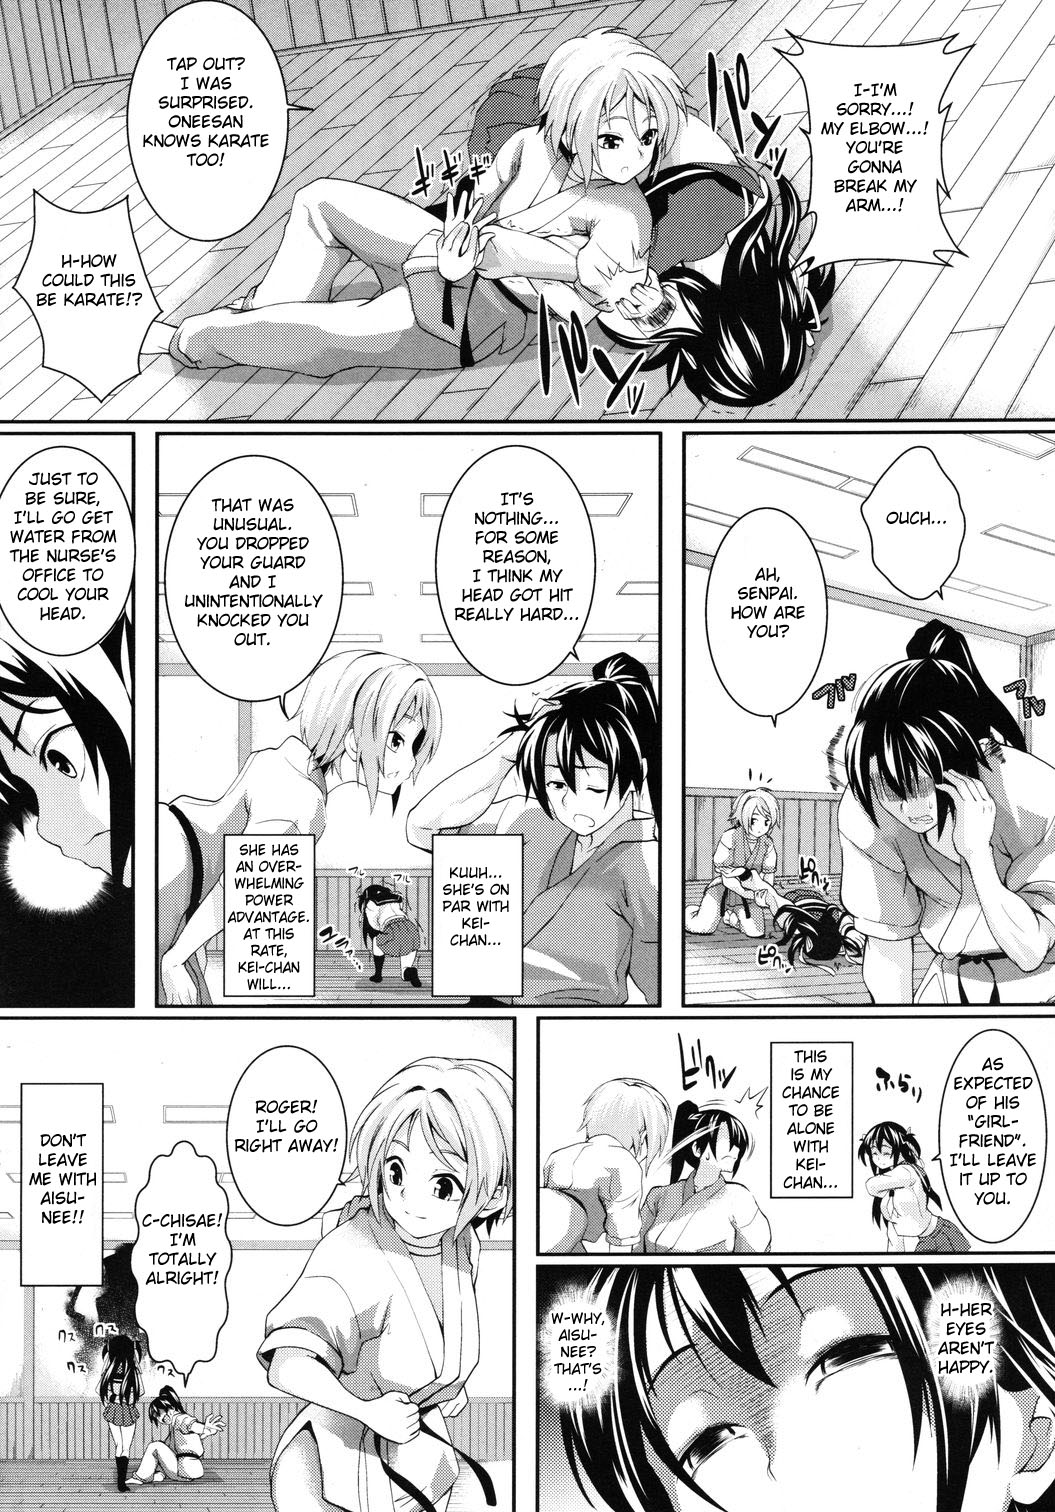 [soba] Tsukushite♪Amaete♪ | Hold Me, Fawn on Me Ch. 1-2 [English] {doujin-moe.us} page 6 full